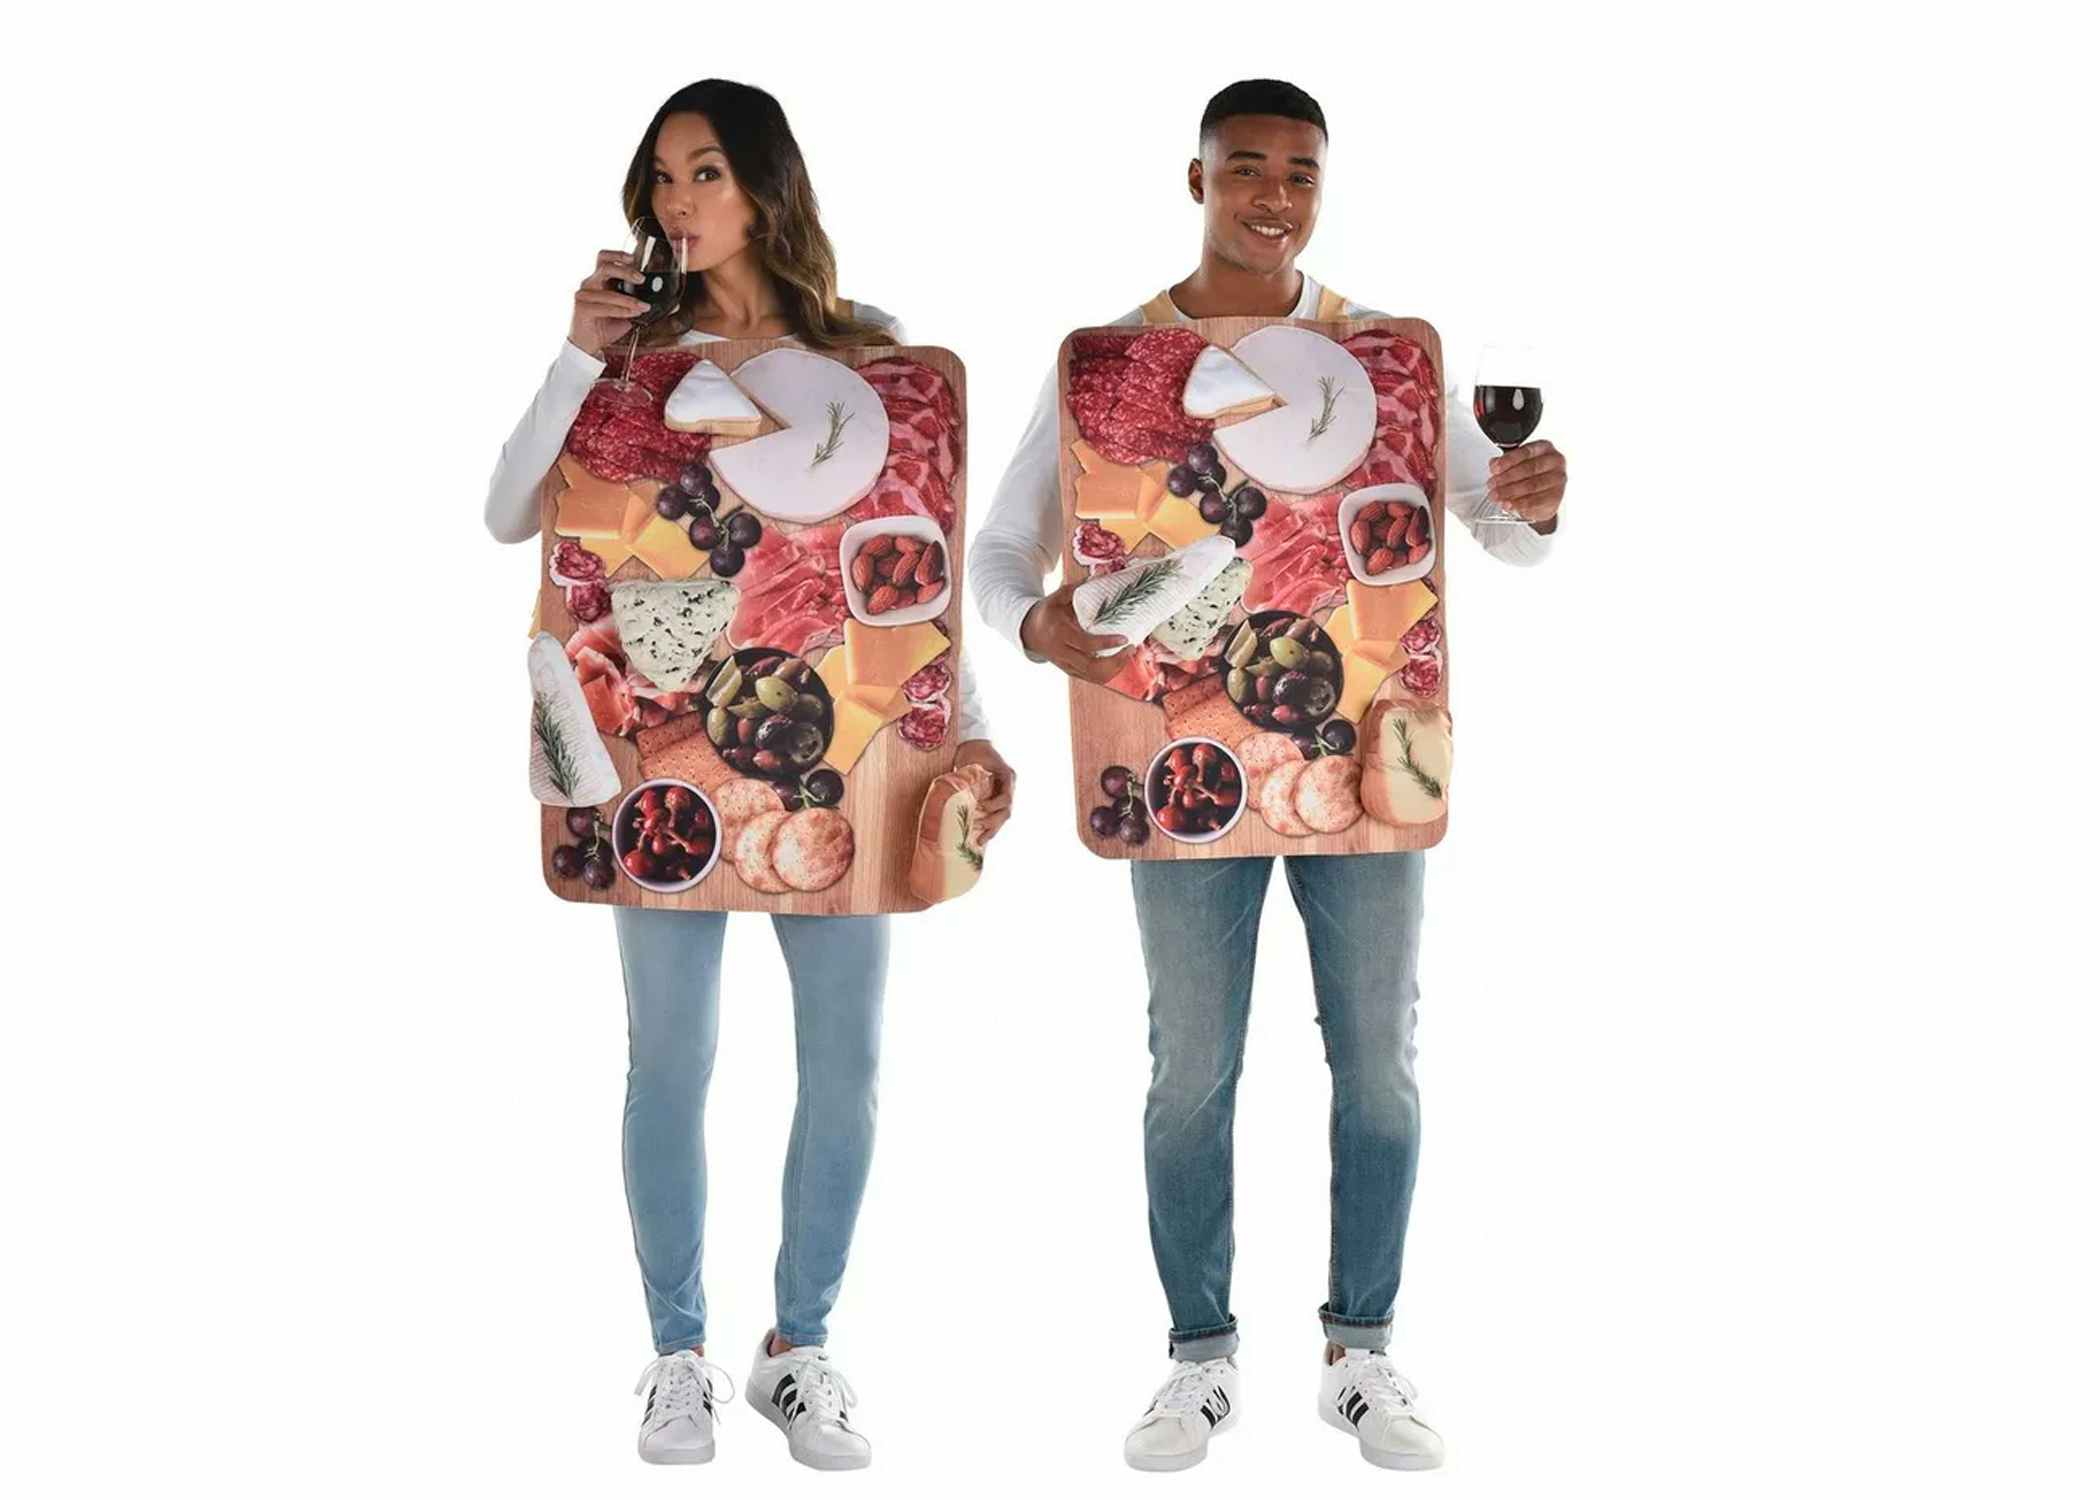 75 Funny Couples Halloween Costume Ideas That'll Win All the Contests   Funny couple halloween costumes, Couple halloween costumes, Couples costumes